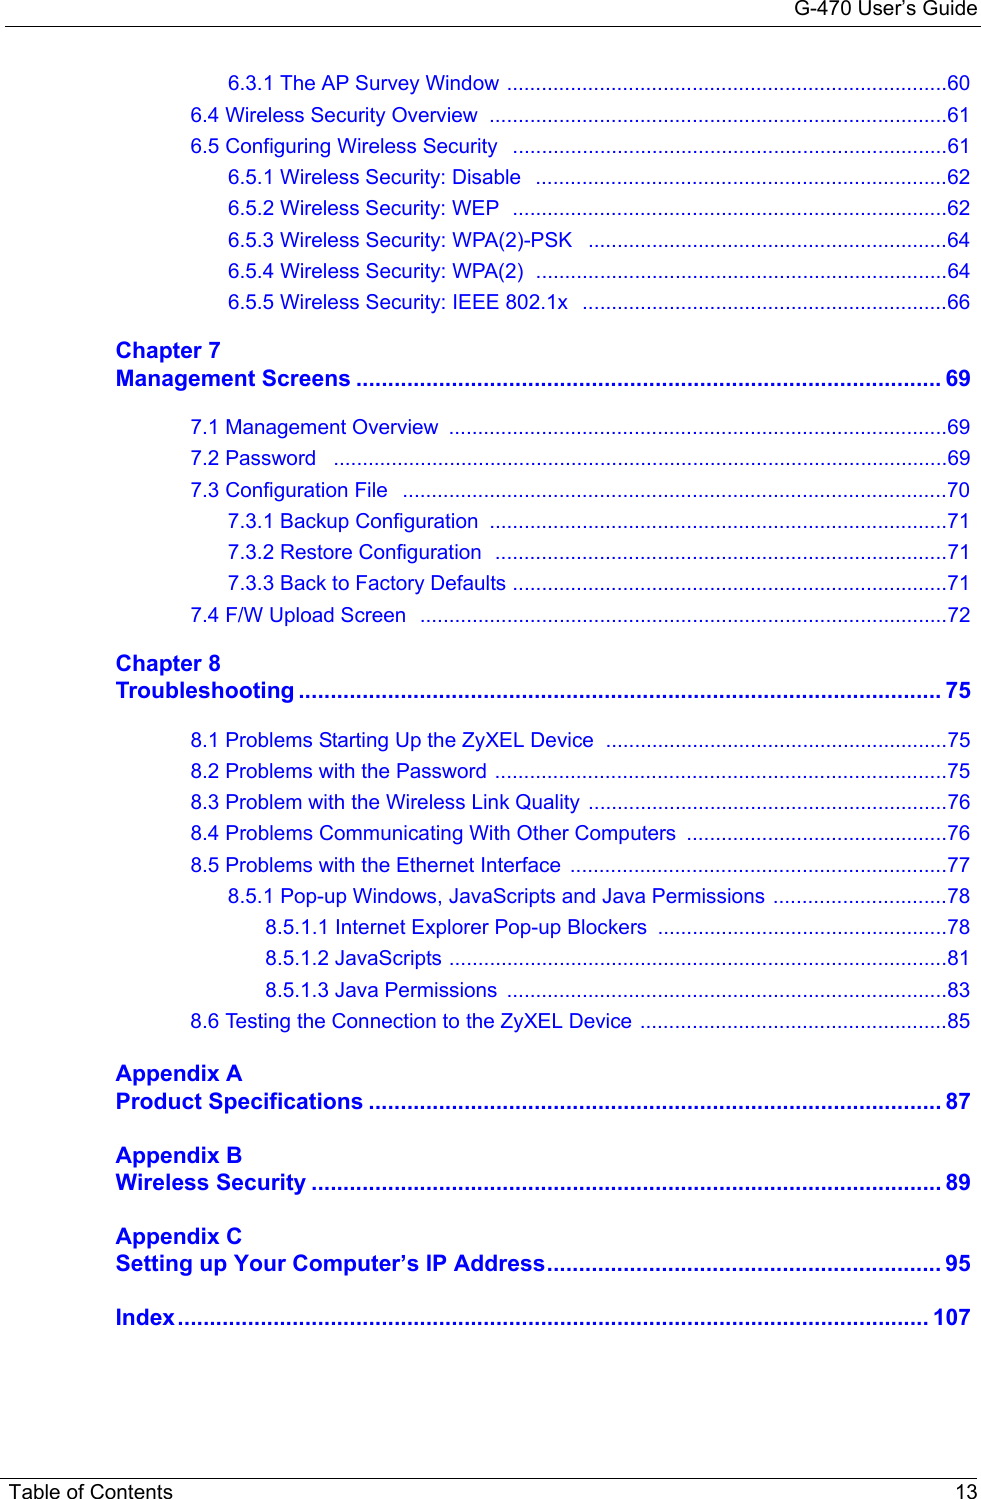 G-470 User’s GuideTable of Contents 136.3.1 The AP Survey Window ............................................................................606.4 Wireless Security Overview  ...............................................................................616.5 Configuring Wireless Security   ...........................................................................616.5.1 Wireless Security: Disable   .......................................................................626.5.2 Wireless Security: WEP  ...........................................................................626.5.3 Wireless Security: WPA(2)-PSK   ..............................................................646.5.4 Wireless Security: WPA(2)  .......................................................................646.5.5 Wireless Security: IEEE 802.1x  ...............................................................66Chapter 7Management Screens ............................................................................................ 697.1 Management Overview  ......................................................................................697.2 Password   ..........................................................................................................697.3 Configuration File   ..............................................................................................707.3.1 Backup Configuration  ...............................................................................717.3.2 Restore Configuration  ..............................................................................717.3.3 Back to Factory Defaults ...........................................................................717.4 F/W Upload Screen  ...........................................................................................72Chapter 8Troubleshooting ..................................................................................................... 758.1 Problems Starting Up the ZyXEL Device ...........................................................758.2 Problems with the Password ..............................................................................758.3 Problem with the Wireless Link Quality ..............................................................768.4 Problems Communicating With Other Computers .............................................768.5 Problems with the Ethernet Interface  .................................................................778.5.1 Pop-up Windows, JavaScripts and Java Permissions ..............................788.5.1.1 Internet Explorer Pop-up Blockers ..................................................788.5.1.2 JavaScripts ......................................................................................818.5.1.3 Java Permissions  ............................................................................838.6 Testing the Connection to the ZyXEL Device .....................................................85Appendix AProduct Specifications .......................................................................................... 87Appendix BWireless Security ................................................................................................... 89Appendix CSetting up Your Computer’s IP Address.............................................................. 95Index...................................................................................................................... 107